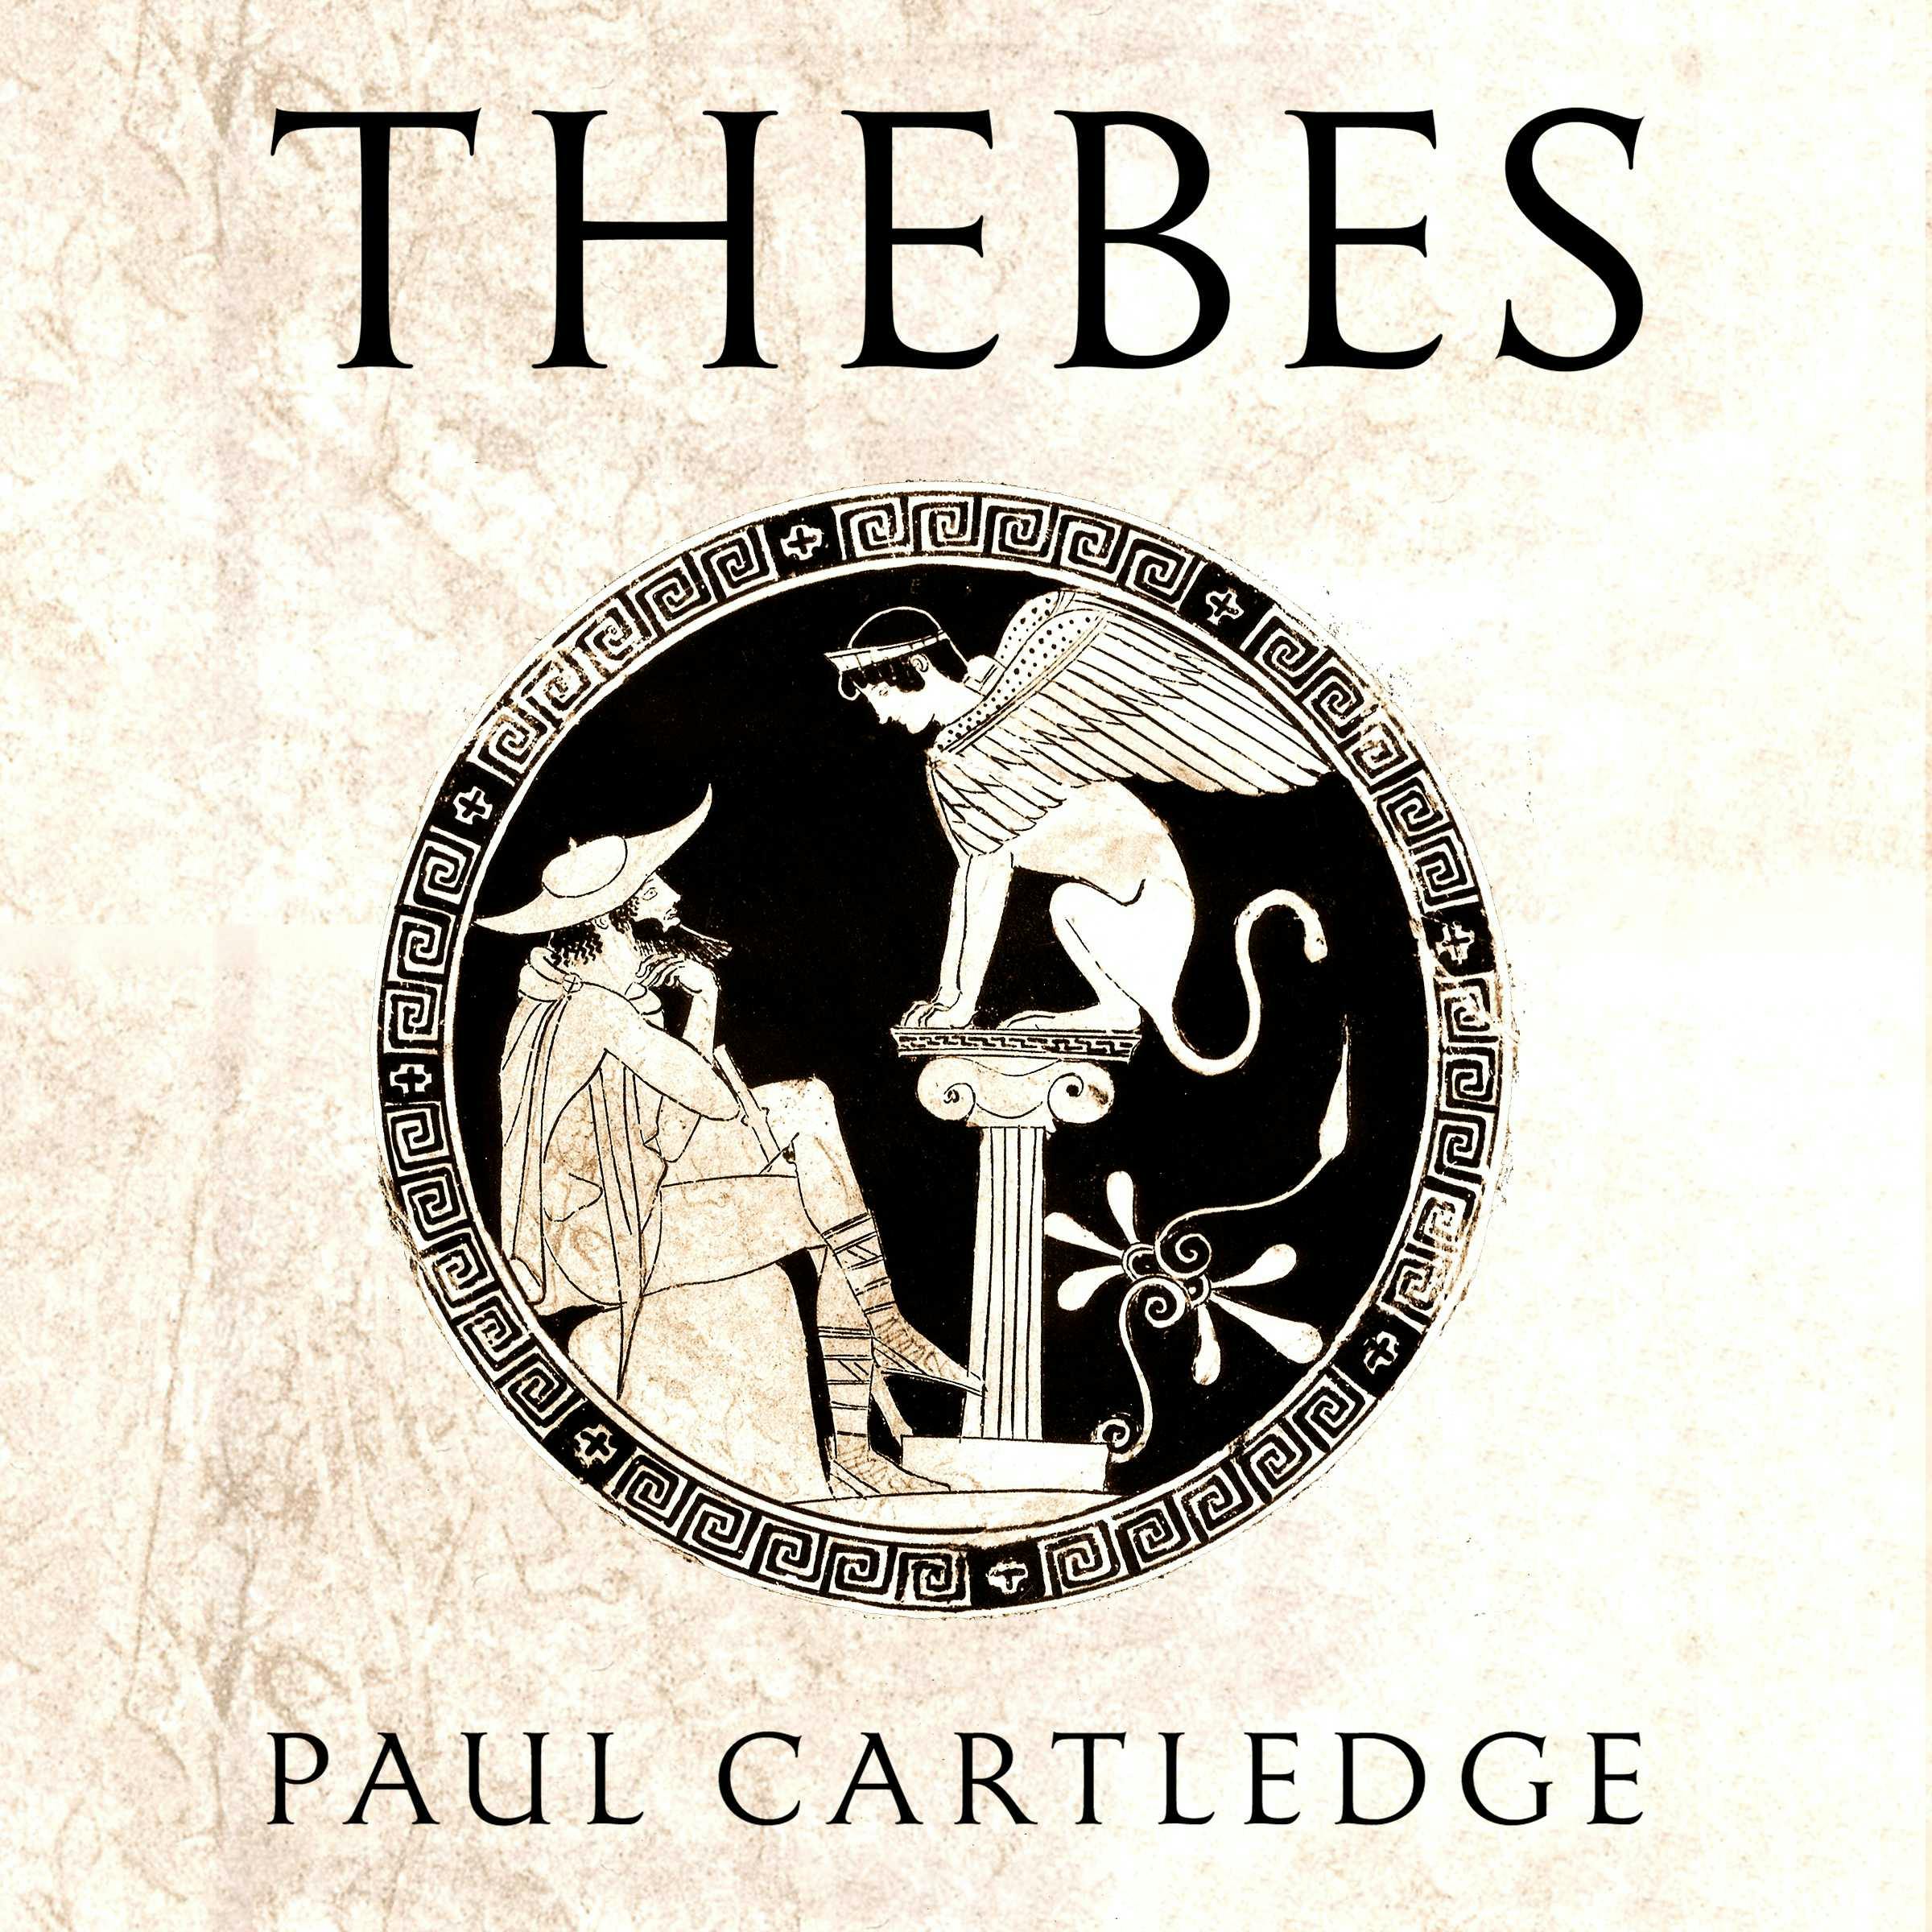 Thebes: The Forgotten City of Ancient Greece - Paul Cartledge